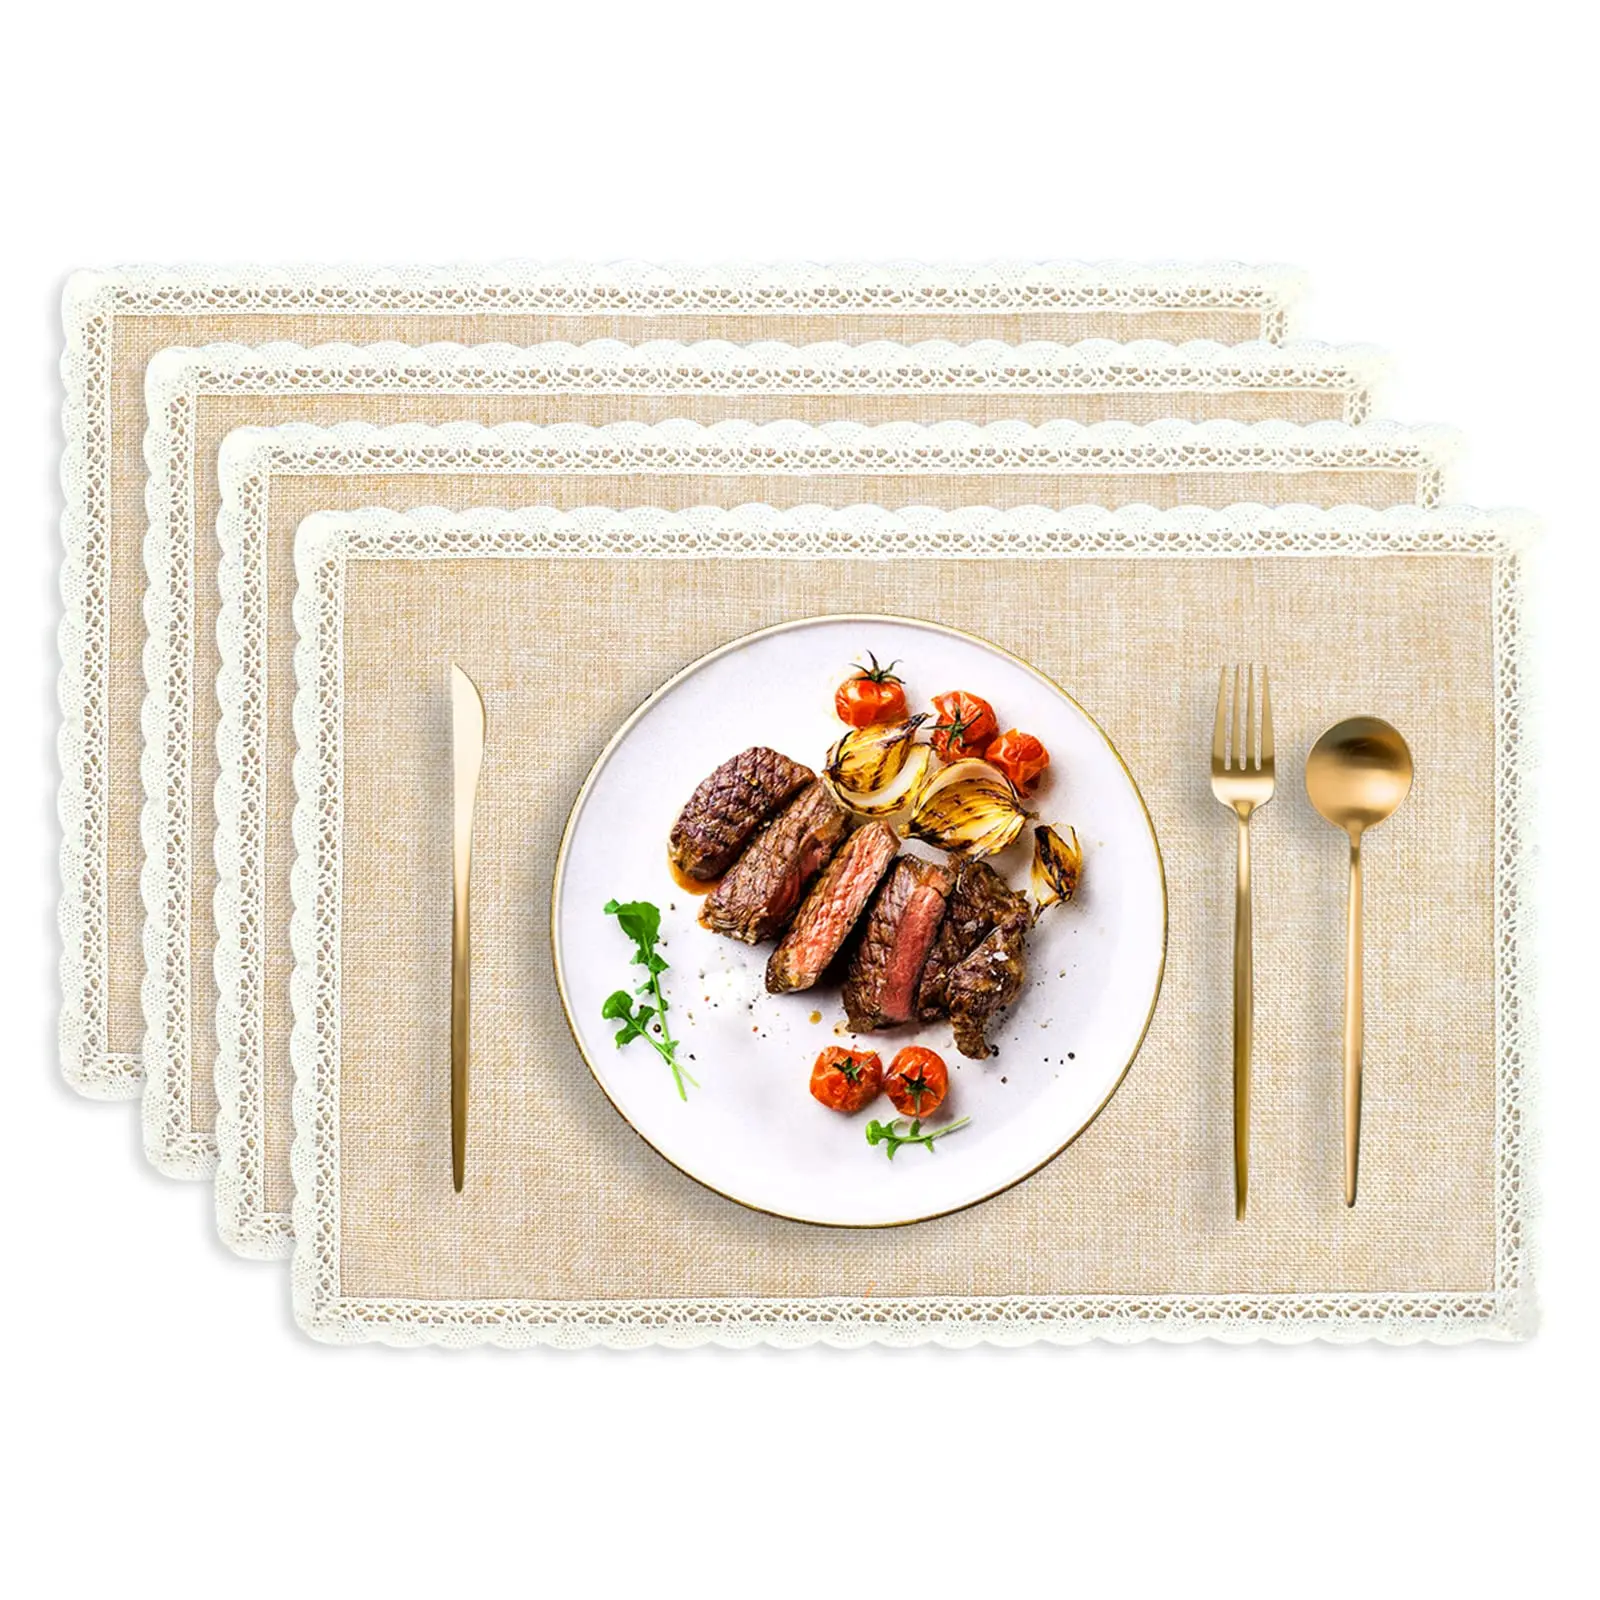 Set of 4 Burlap Placemats,Two Layers Faux Linen Table Mats, Heat-Resistant, Non-Slip Rustic Dinner Table Mat with Lace